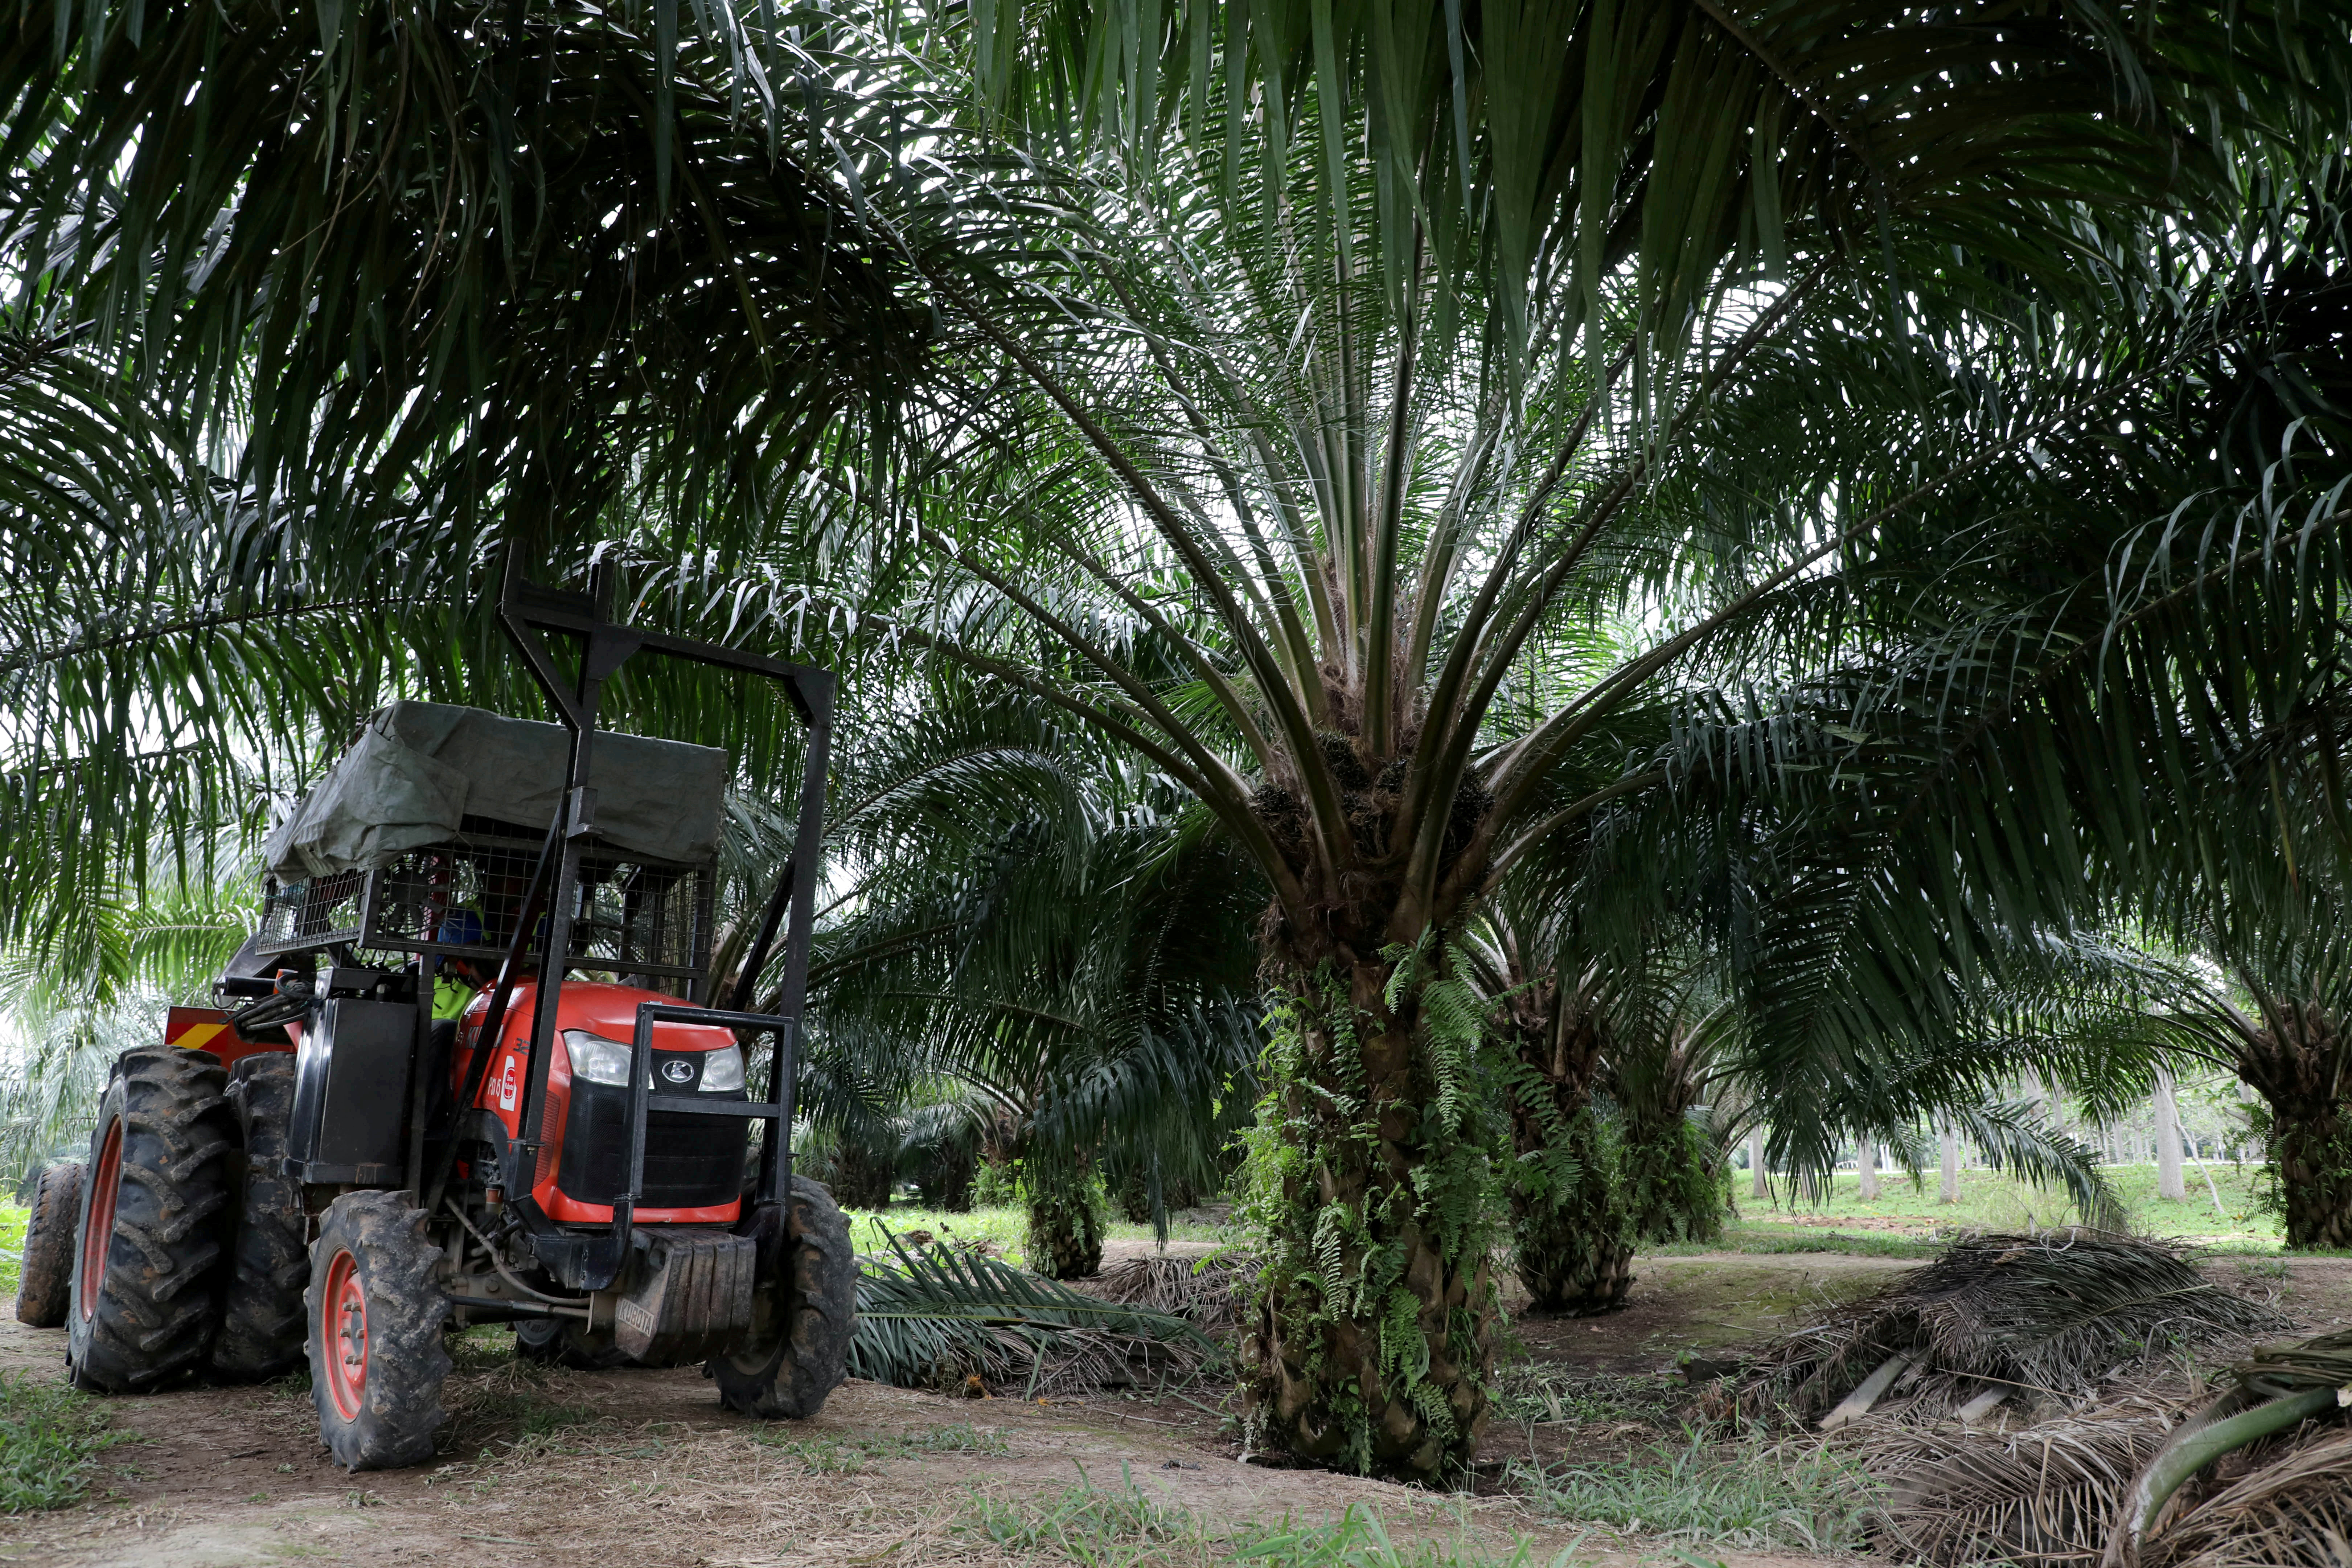 A mini tractor grabber collects palm oil fruits at a plantation in Pulau Carey, Malaysia